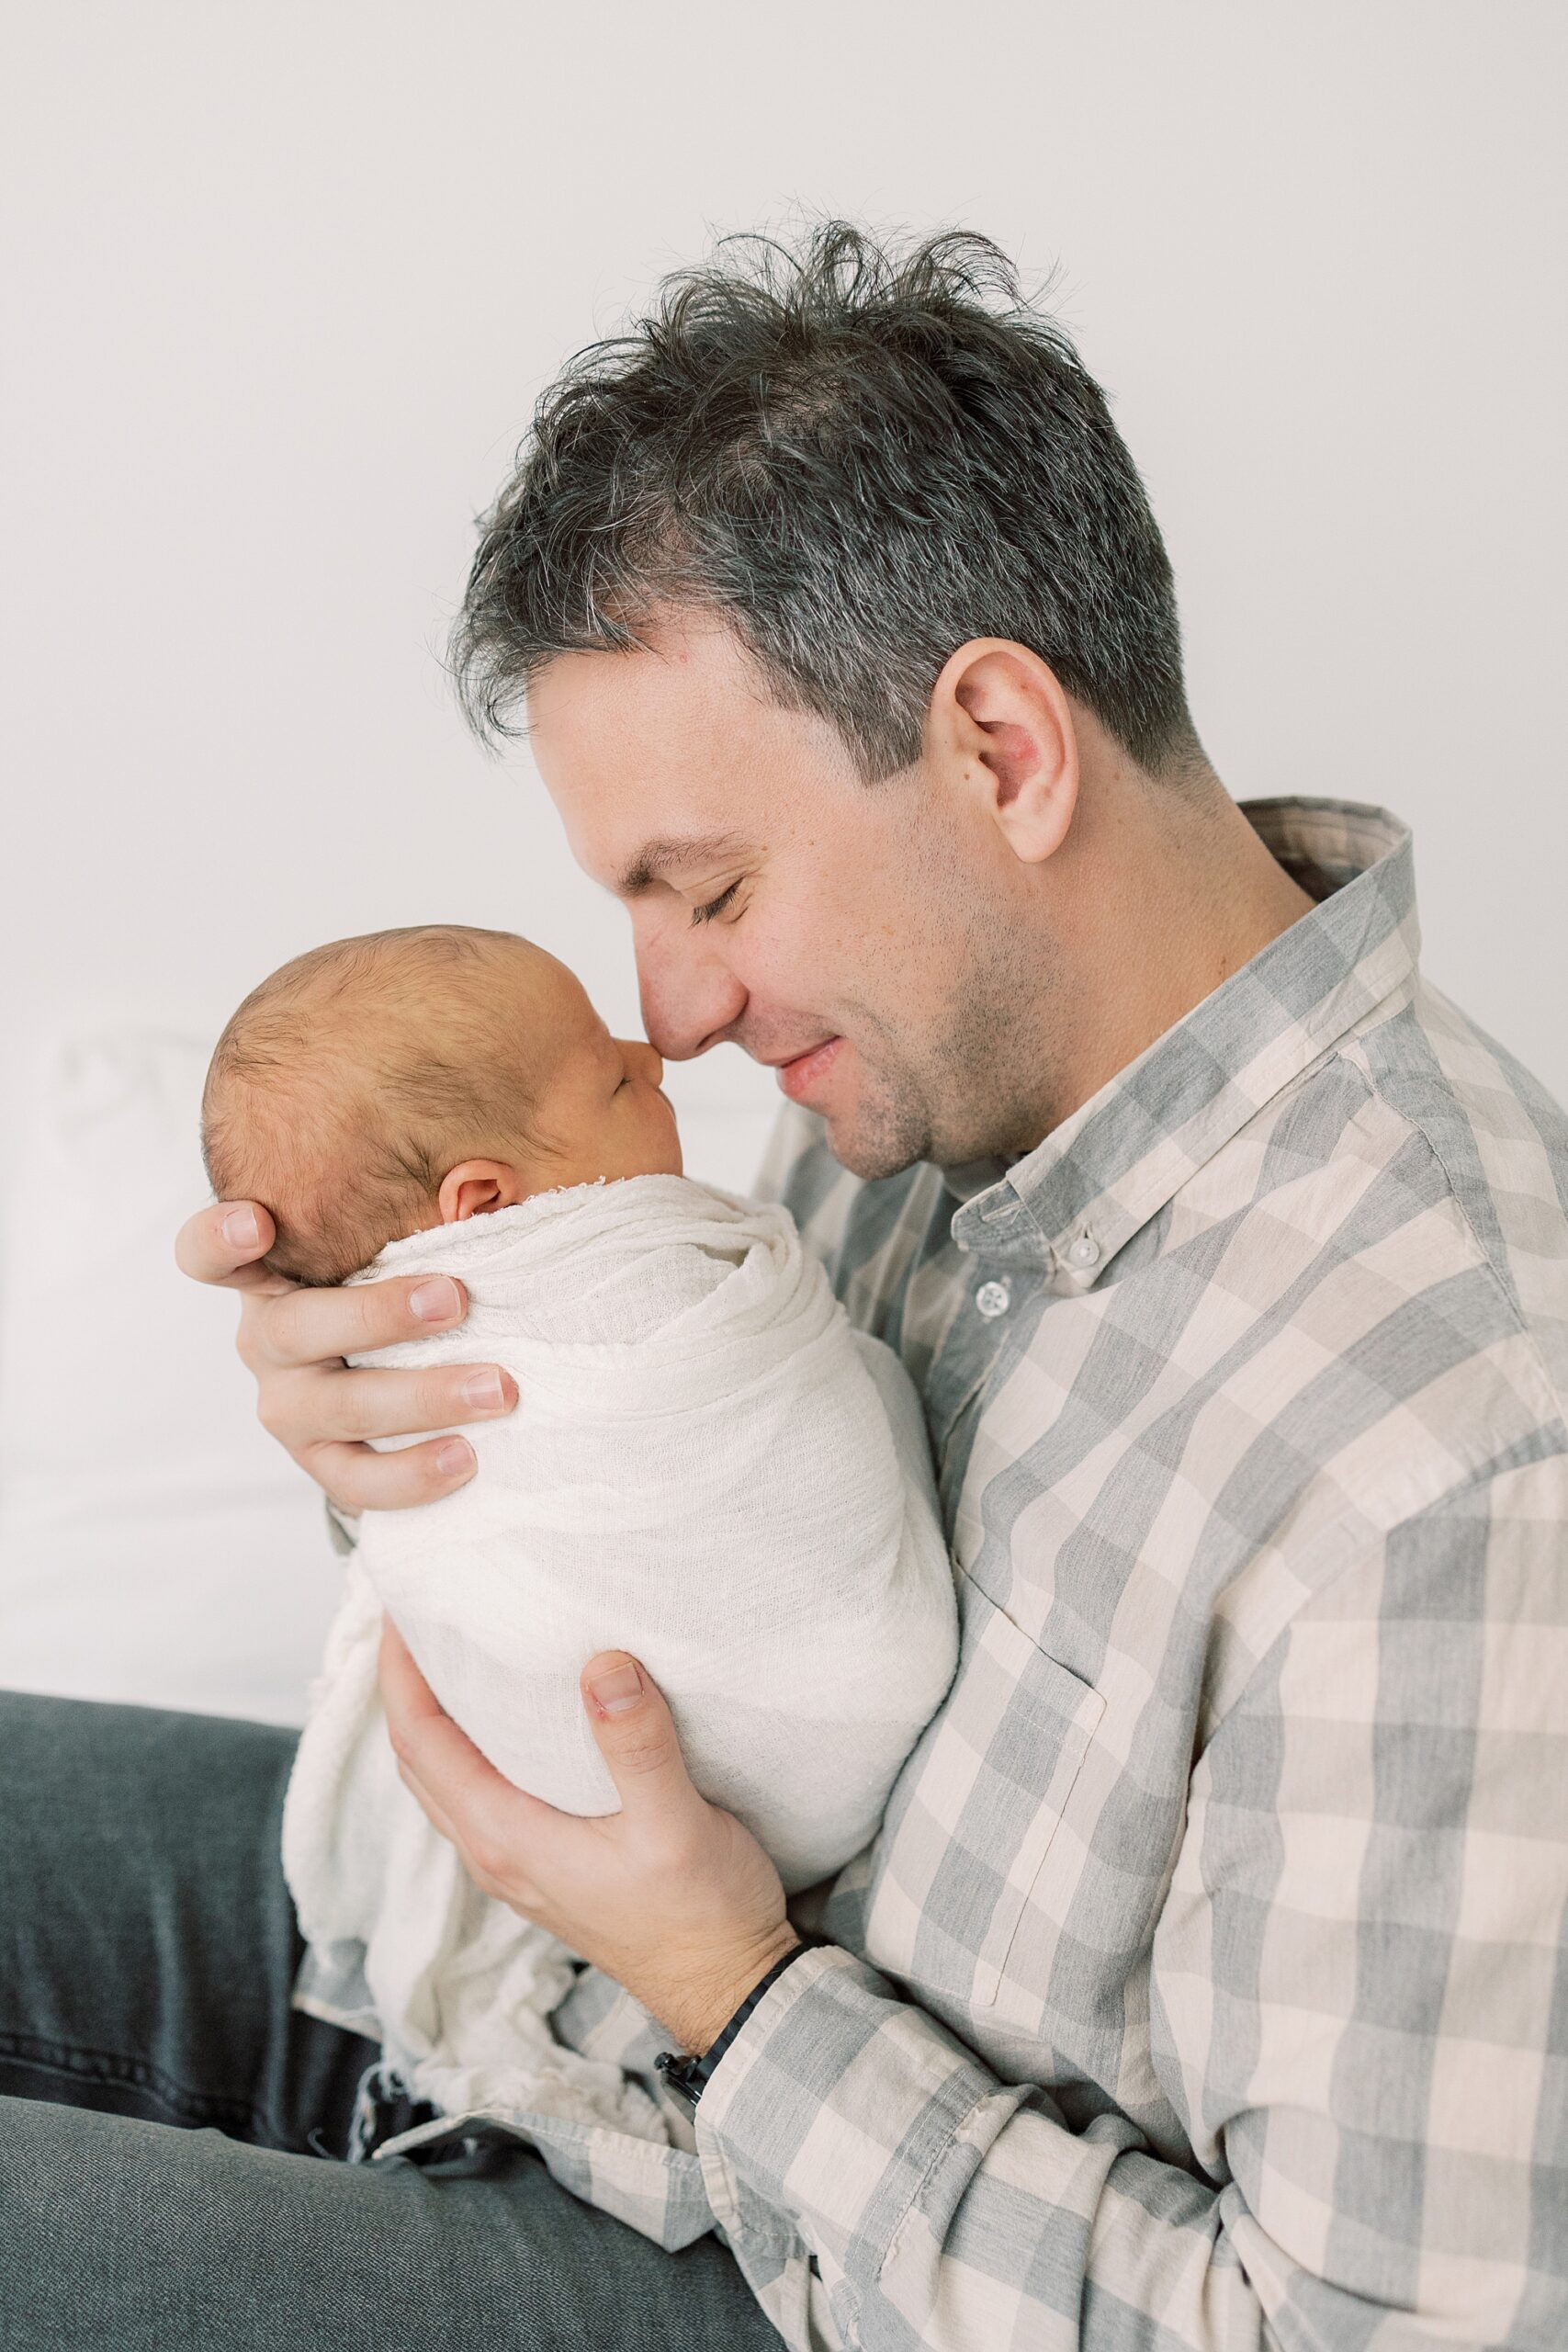 dad nuzzles baby's nose in white wrap during PA newborn portraits at home